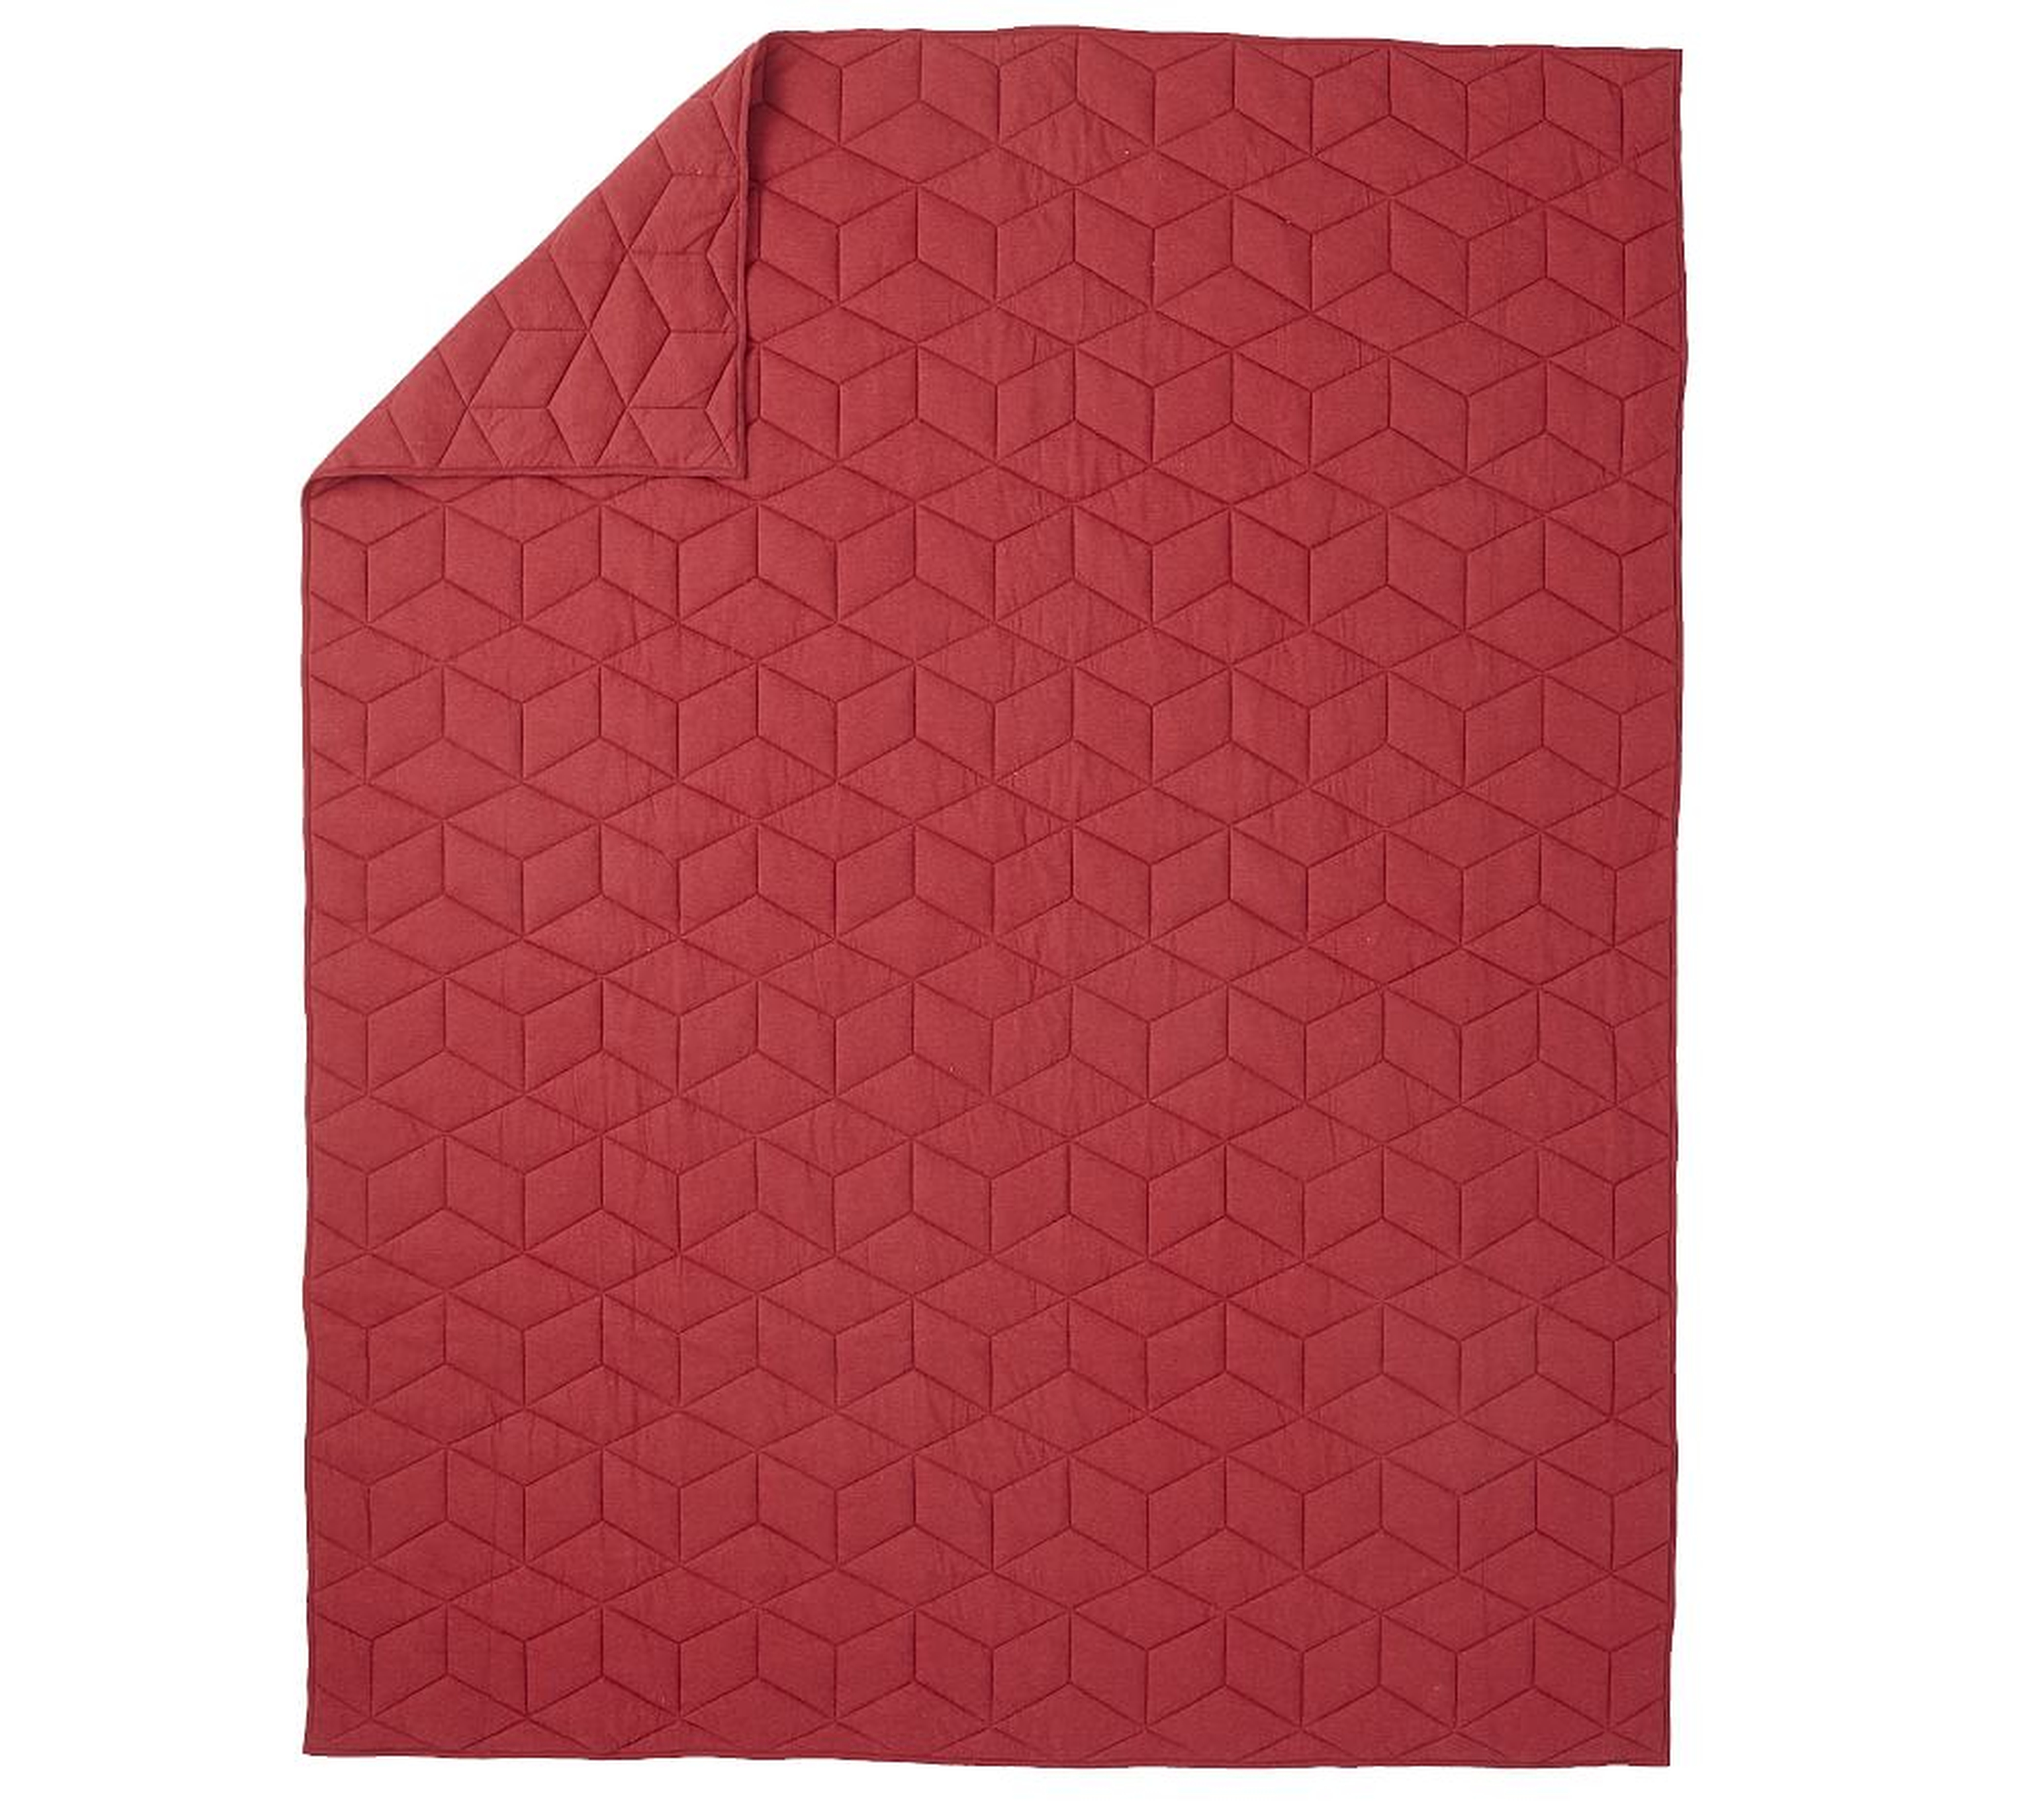 Jersey Quilt, Full/Queen, Red - Pottery Barn Kids